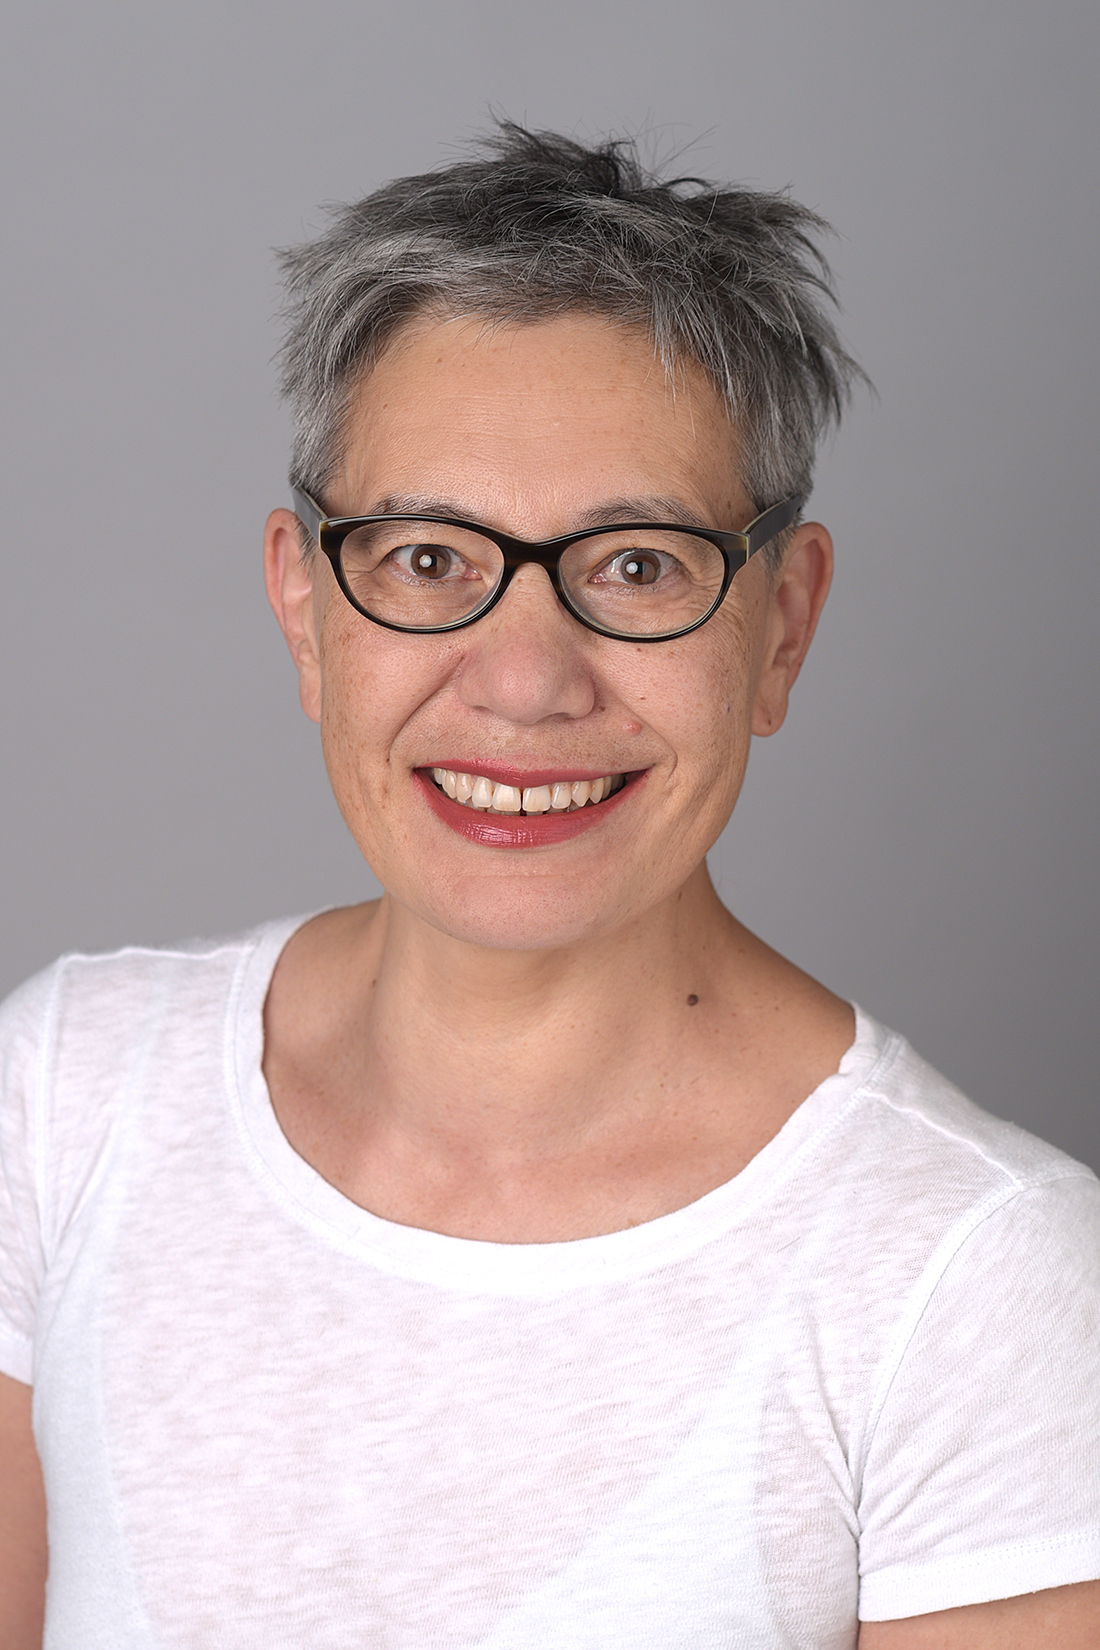 Prof. Dr. Nicola Low, Institute of Social and Preventive Medicine (ISPM), University of Bern. Image: Courtesy of N. Low